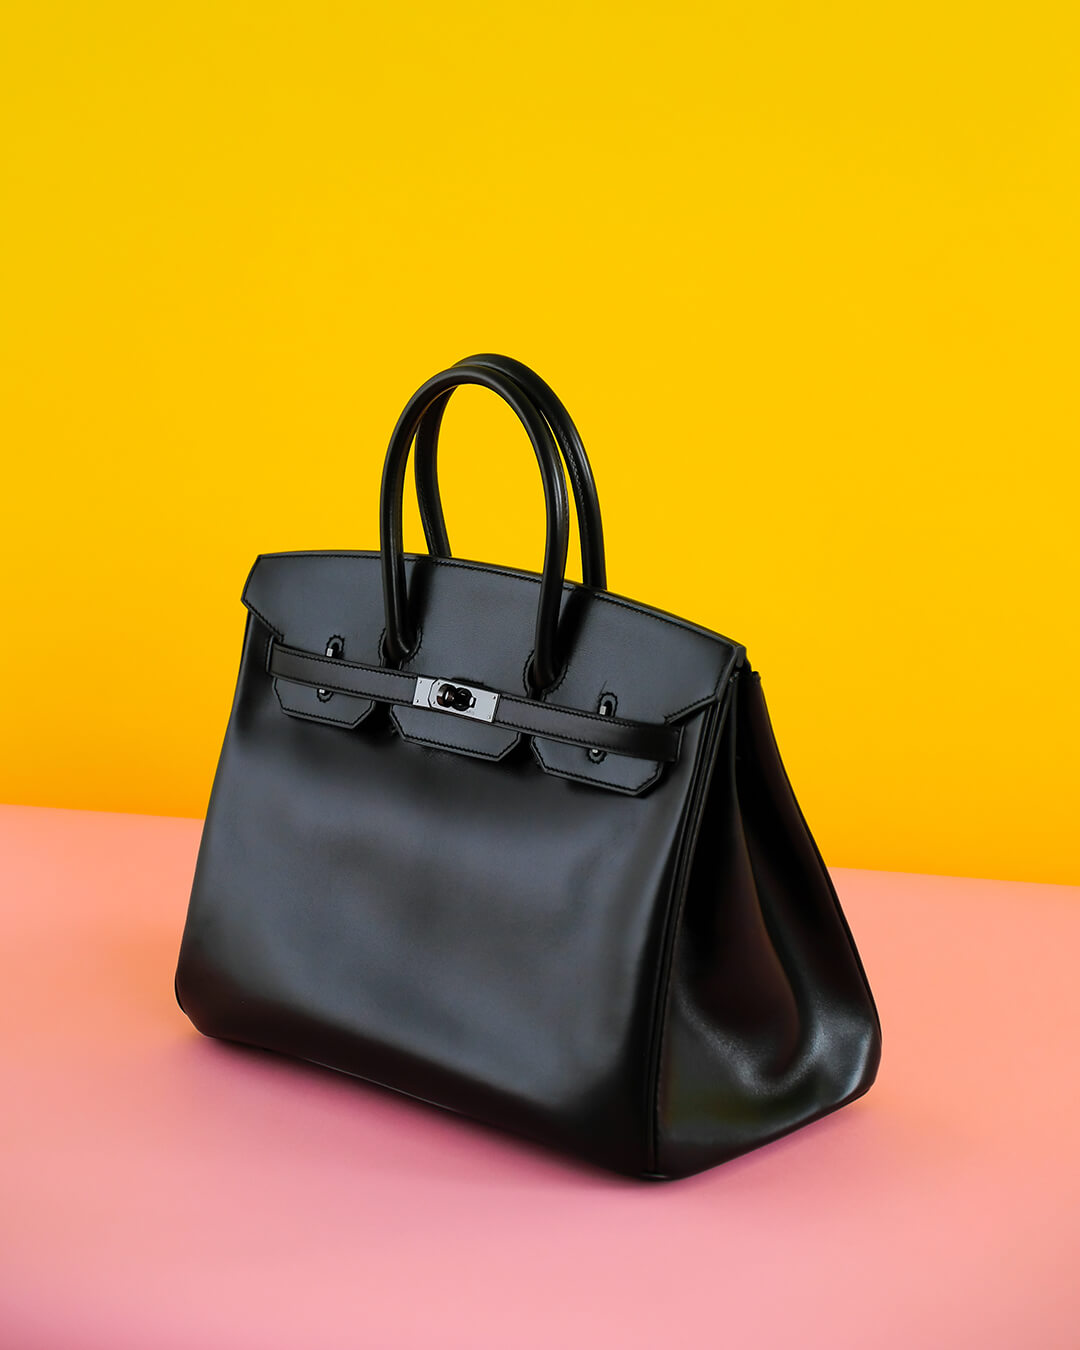 Now's Your Chance To Invest In A Hermes Just $10